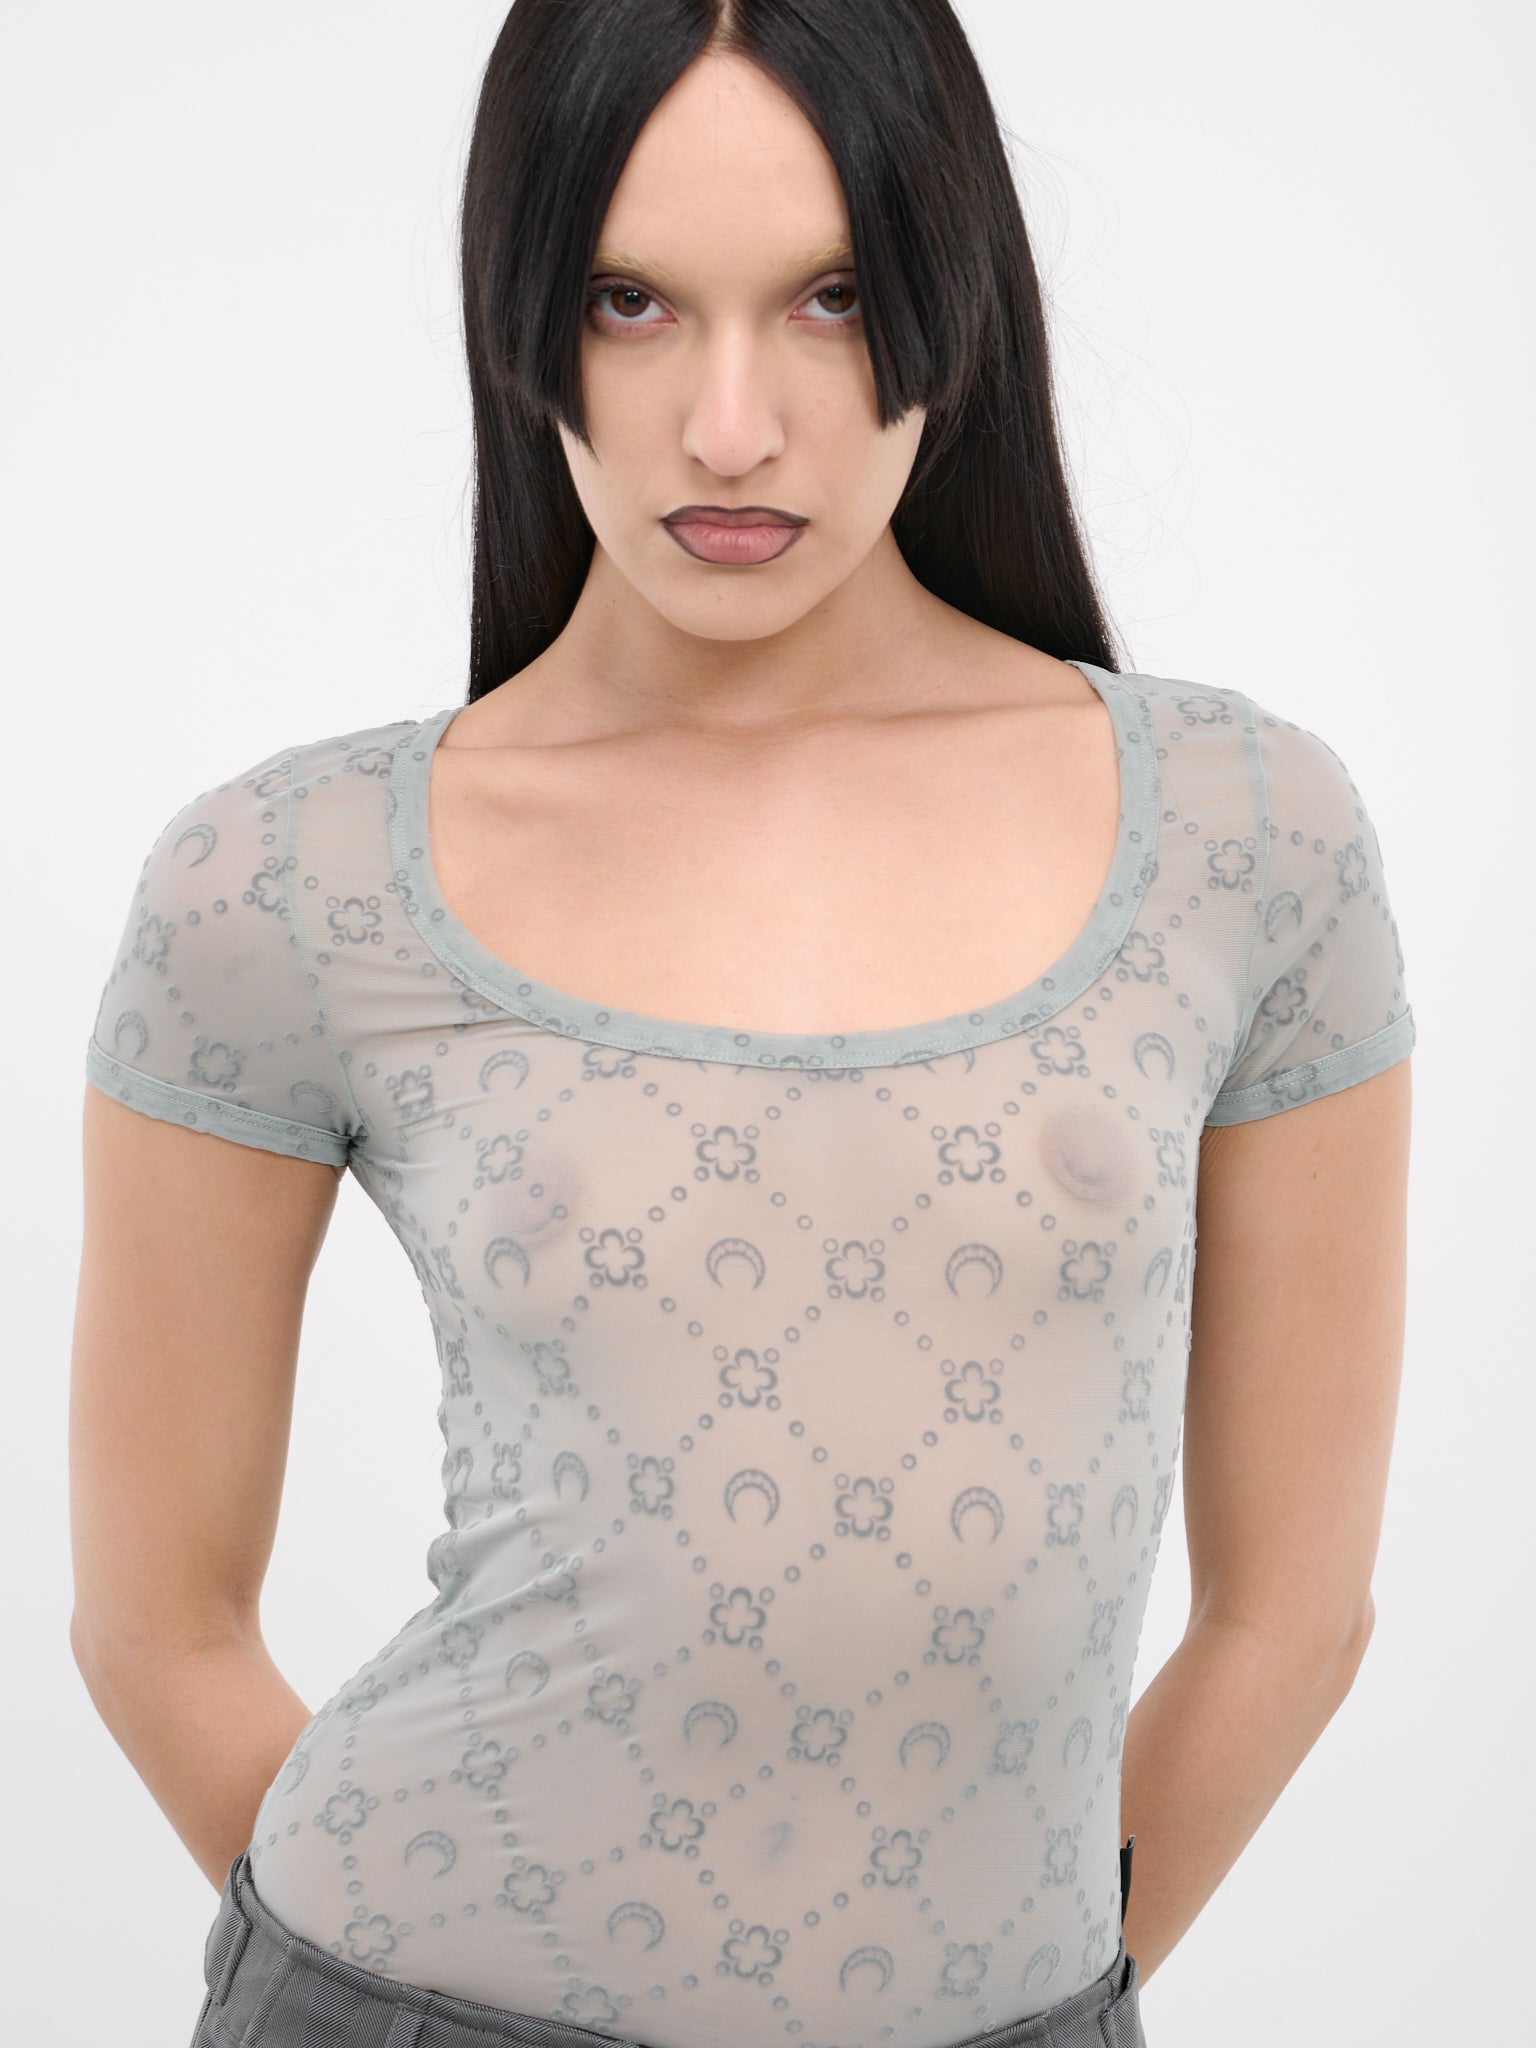 Monogram Mesh Fitted Top (WTO389-CJER005-GREY)